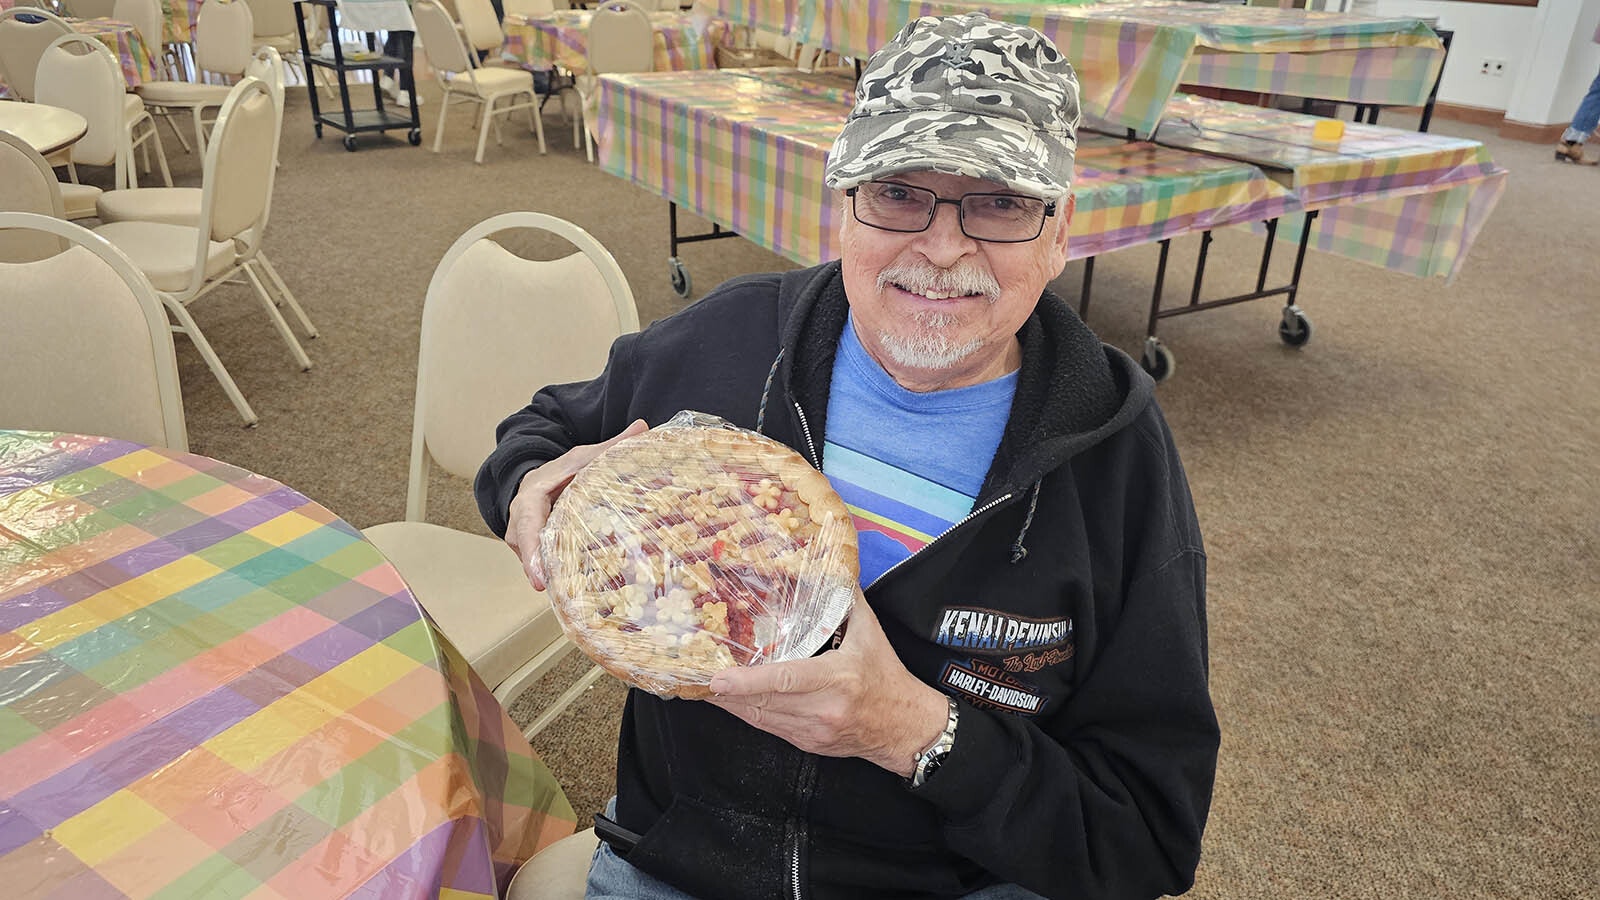 A happy pie auction customer with a sweet cherry pie.